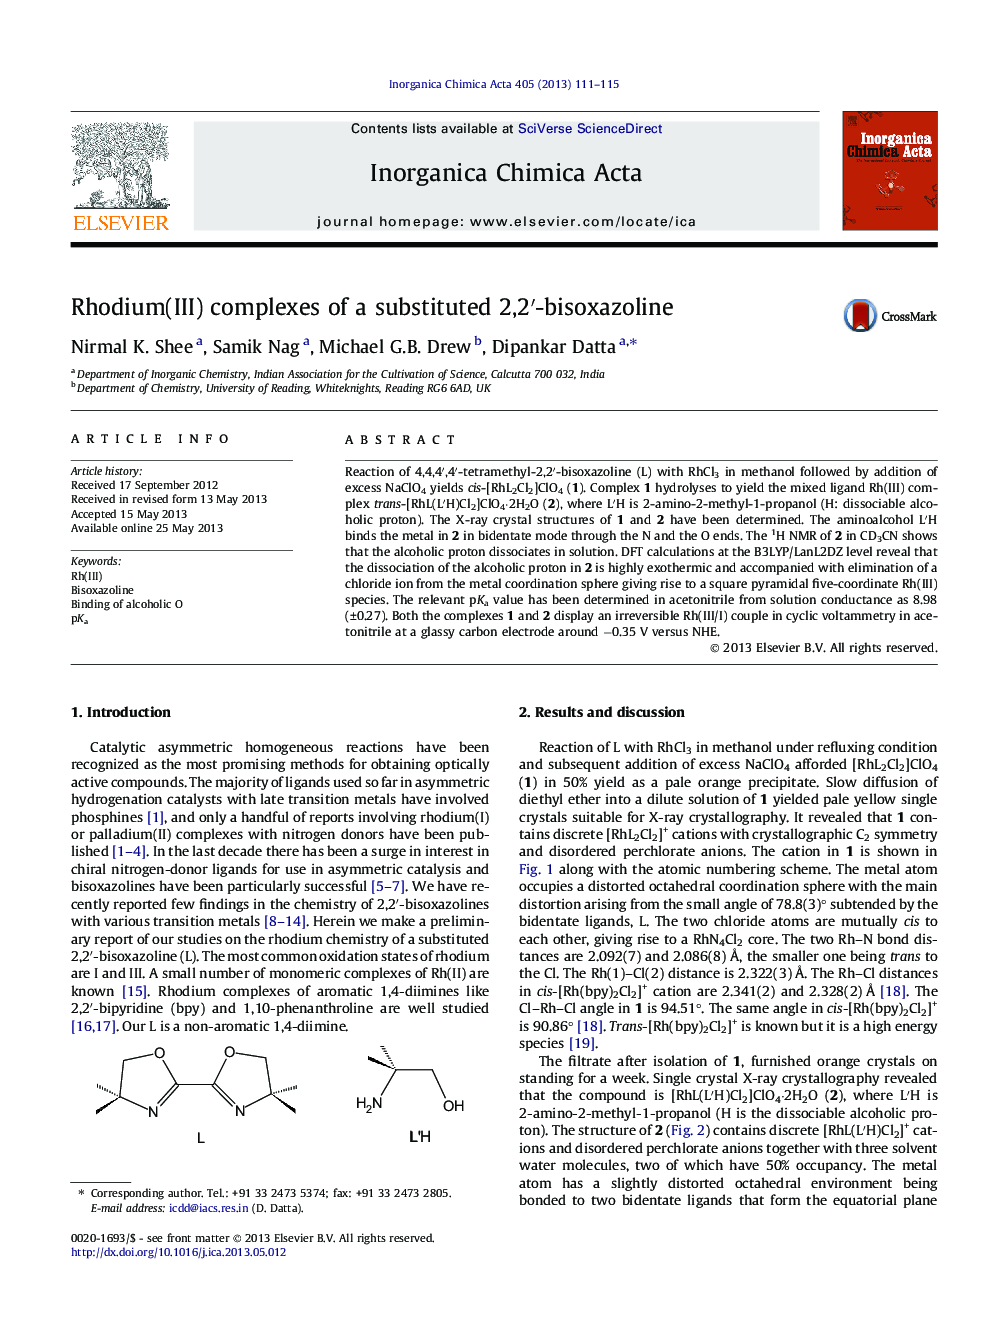 Rhodium(III) complexes of a substituted 2,2â²-bisoxazoline